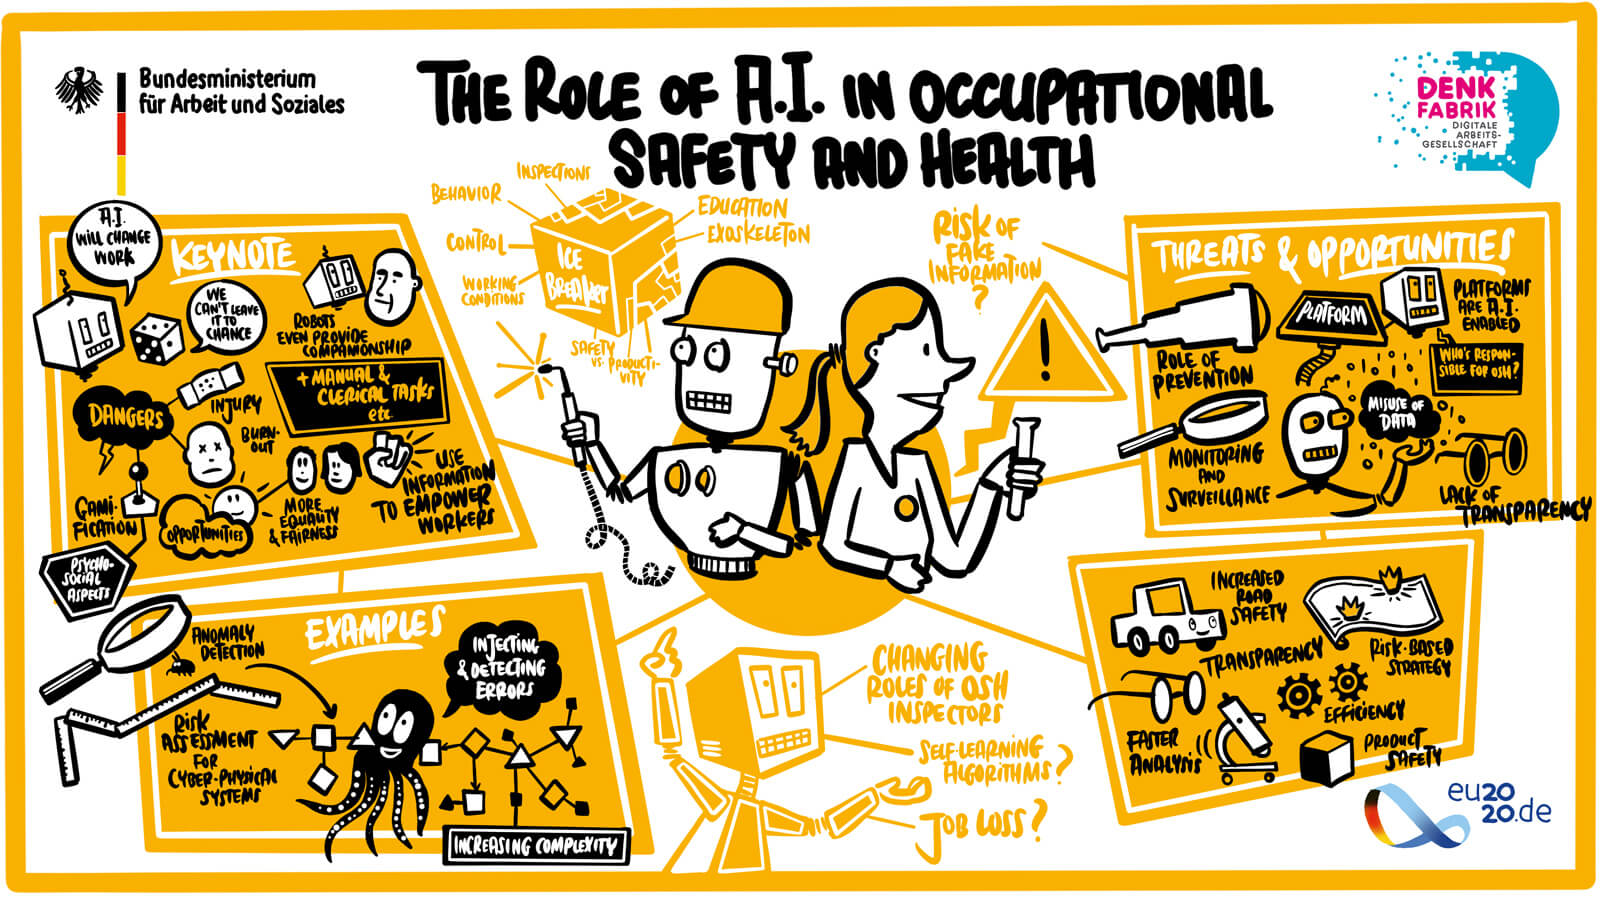 Infographic: The Role of A.I. in Occupational Safety and Health